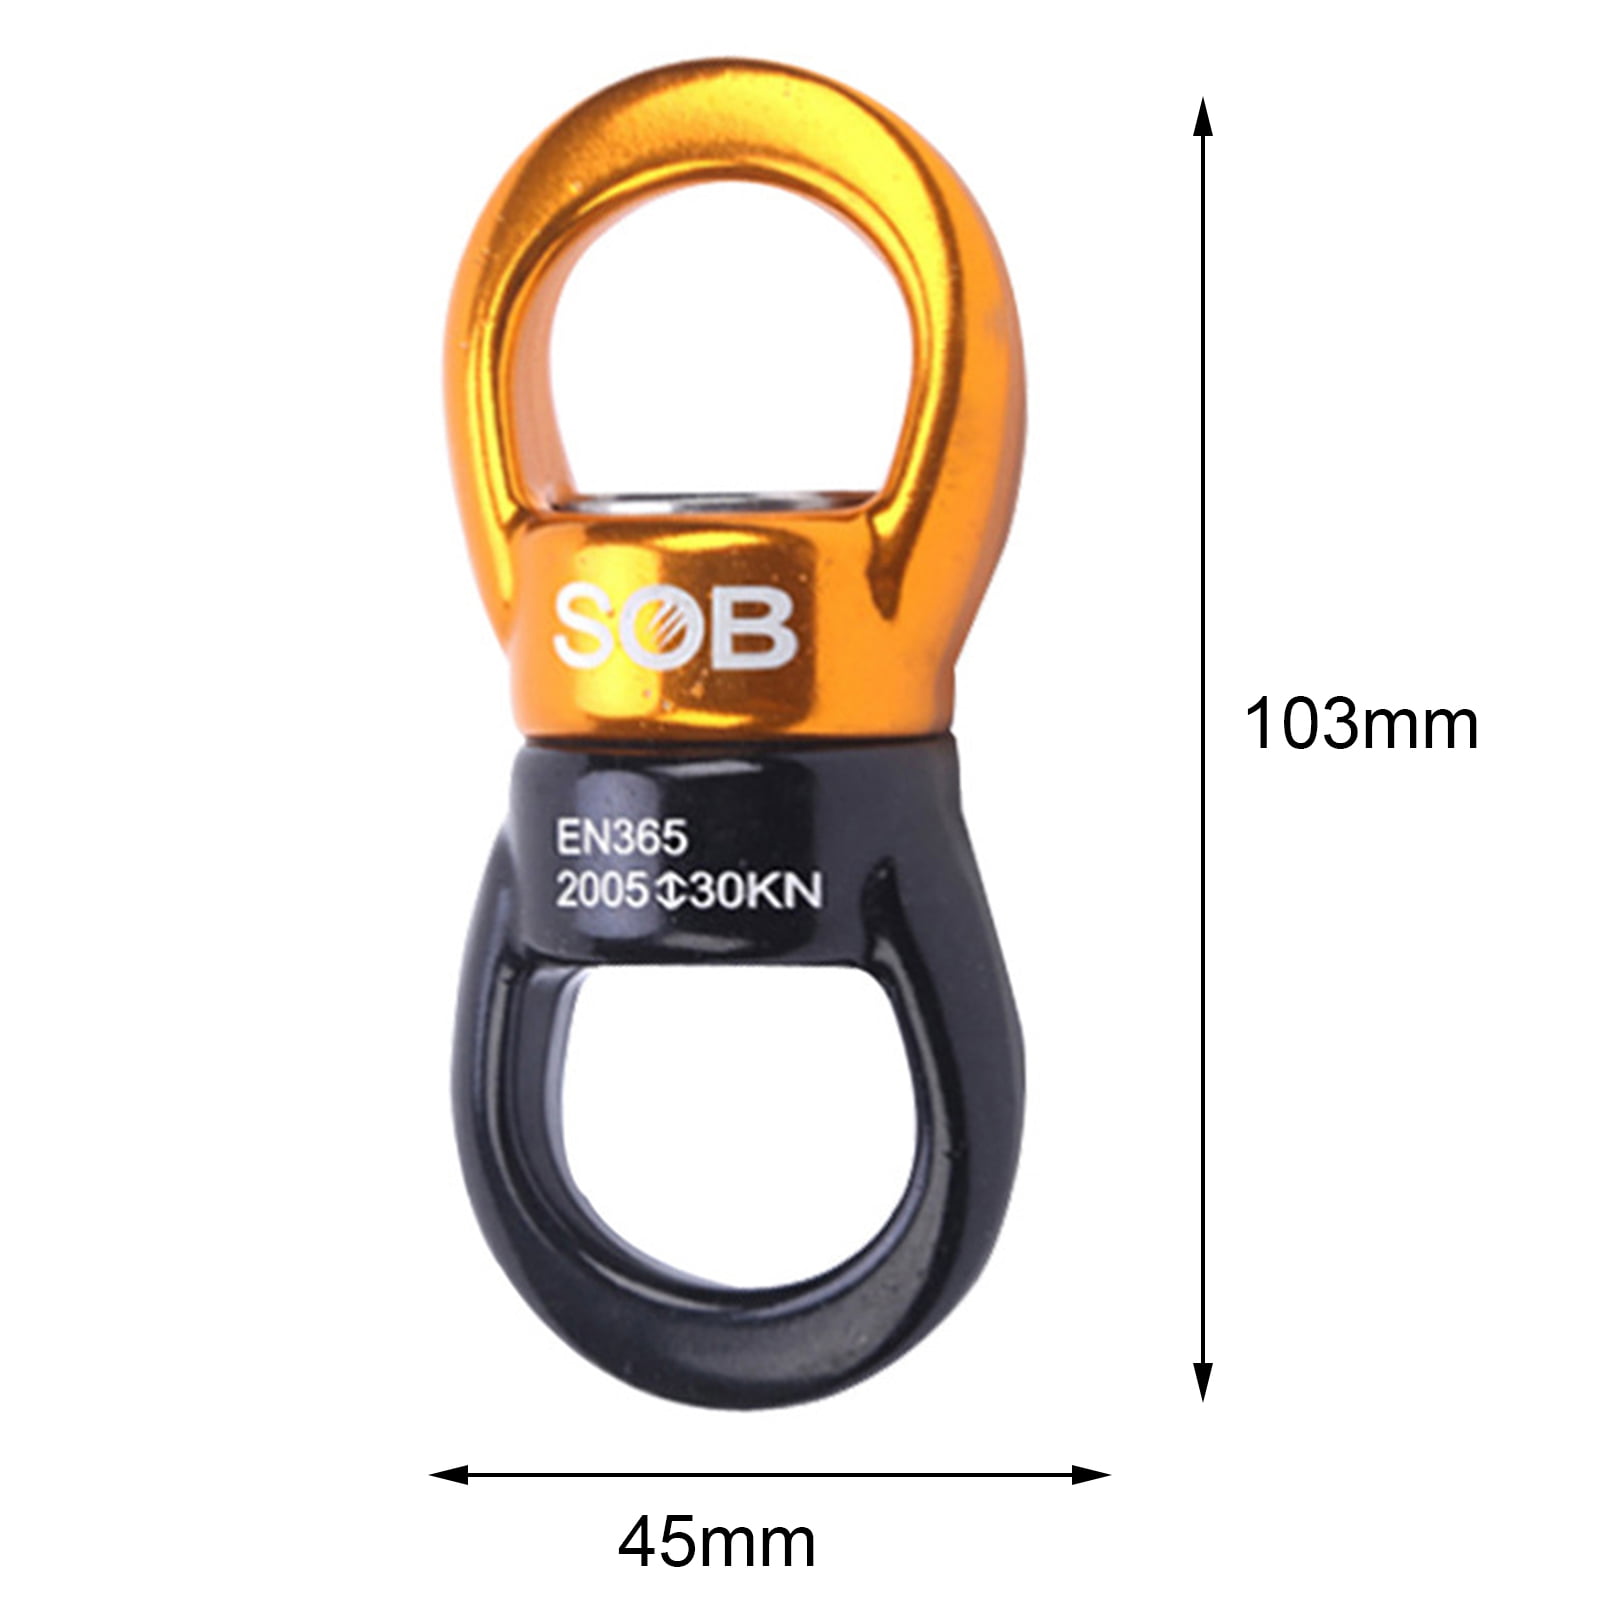 Carabiner for Climbing Rescue Hammock/Swing Set 30KN Rope Swivel Connector 